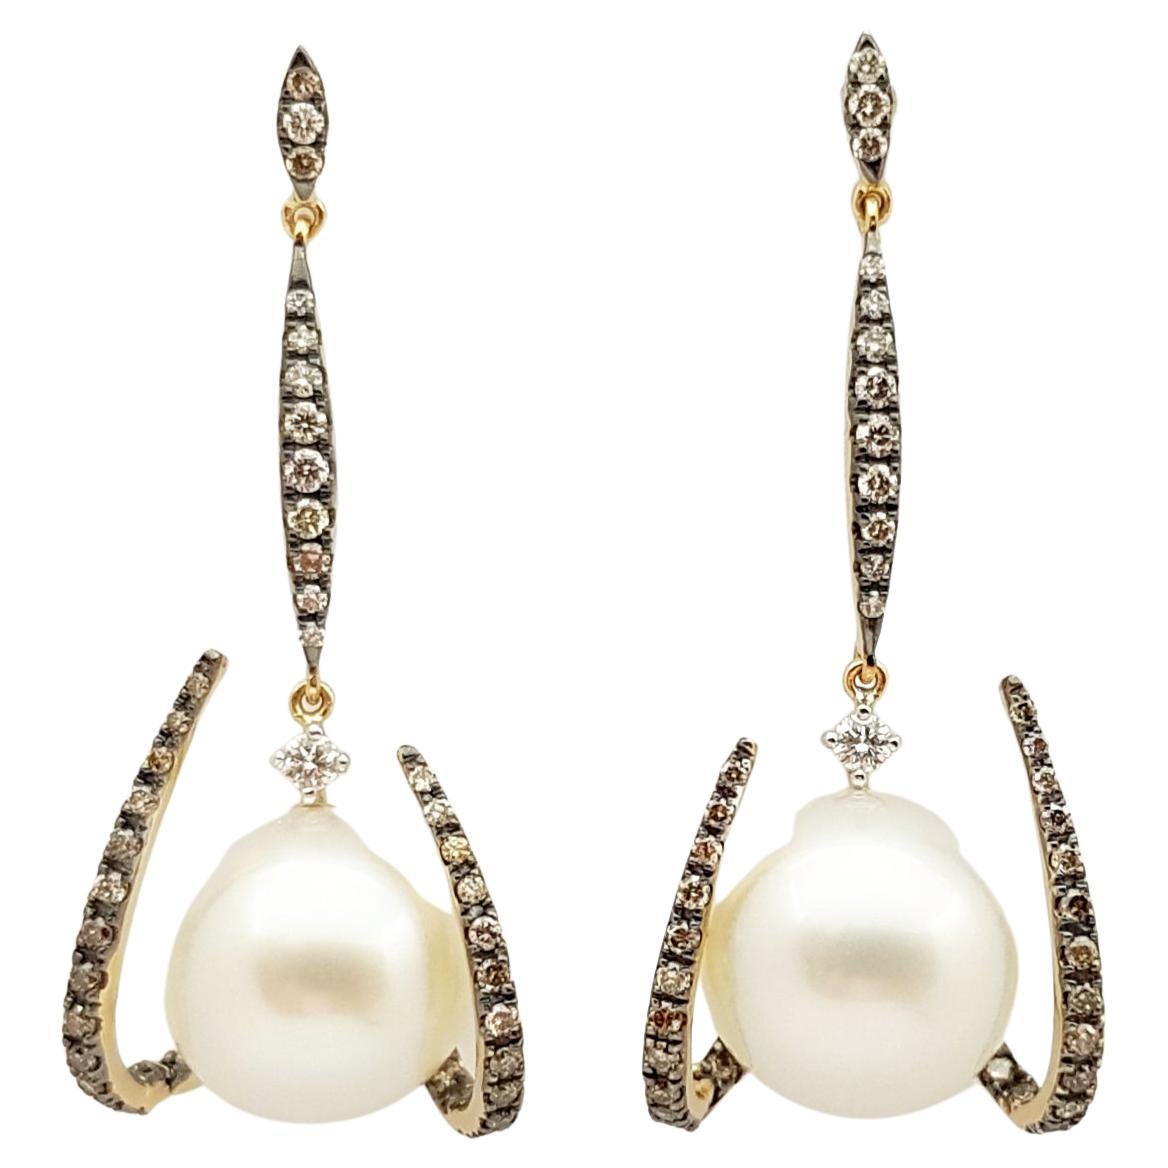 Pearl with Brown Diamond and Diamond Earrings in 18K Gold by Kavant & Sharart